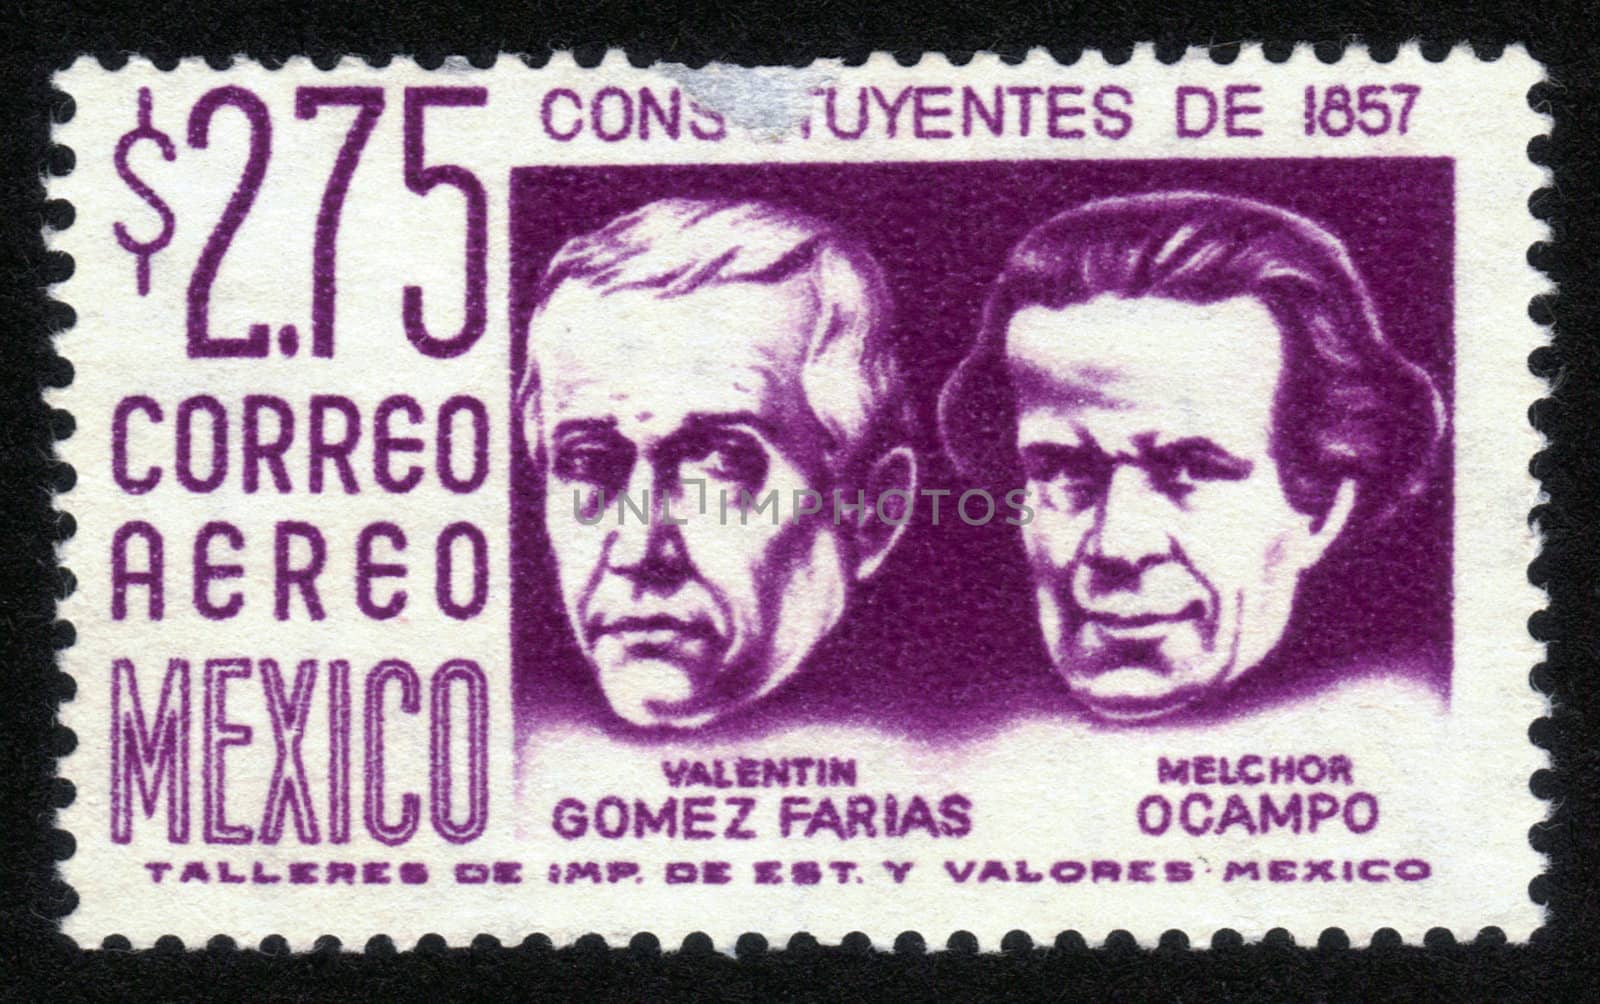 MEXICO - CIRCA 1963: A stamp printed in MEXICO shows portrait of Valentin Gomez Farias, 33rd President of Mexico and Melchor Ocampo, Mexican lawyer, scientist and liberal politician., Circa 1963